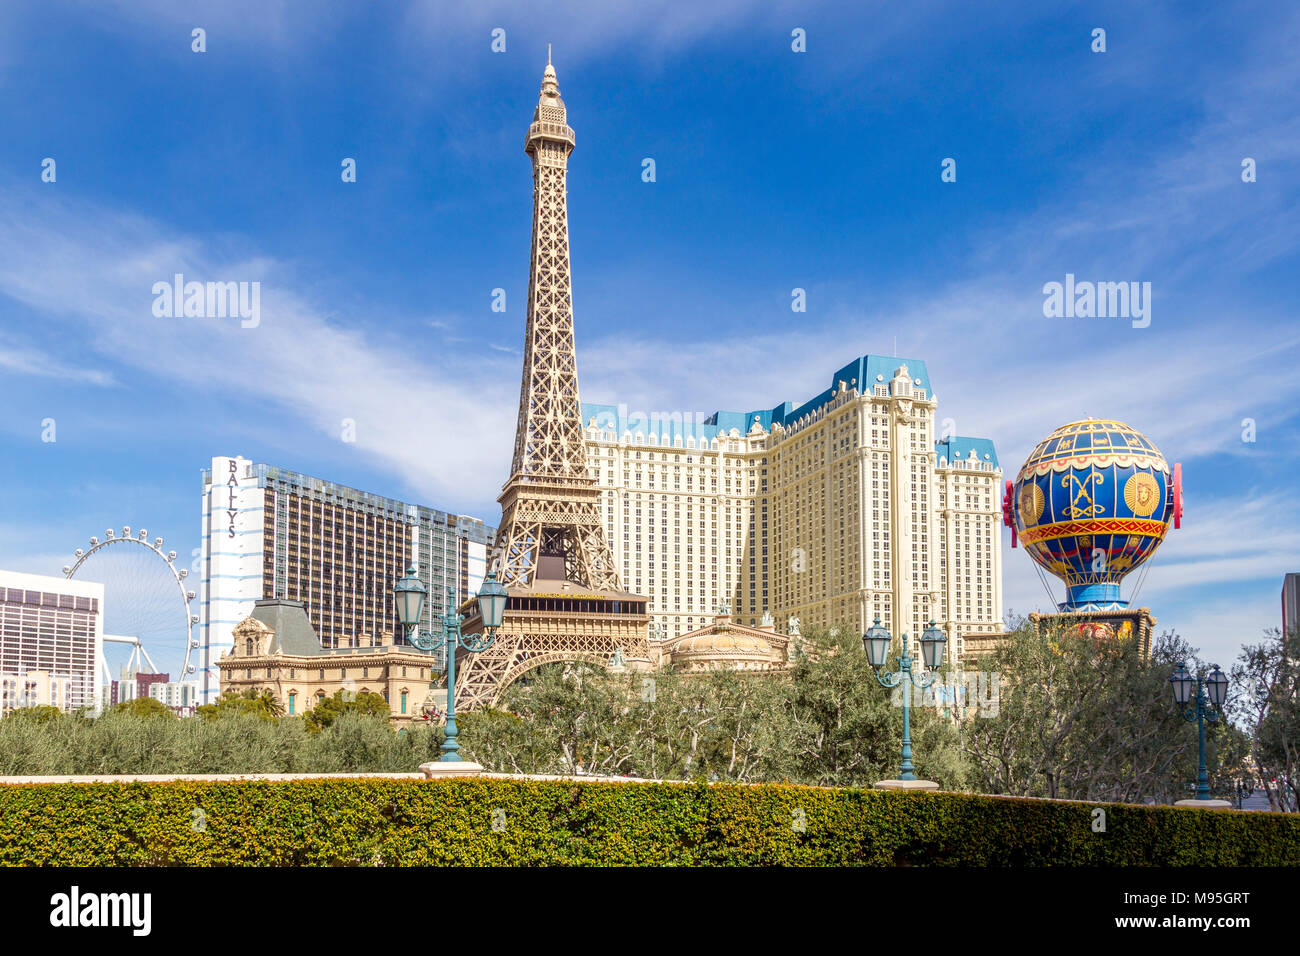 File:Las Vegas Eiffel Tower as seen from the hotel The Bellagio, 18 May  2010.jpg - Wikimedia Commons